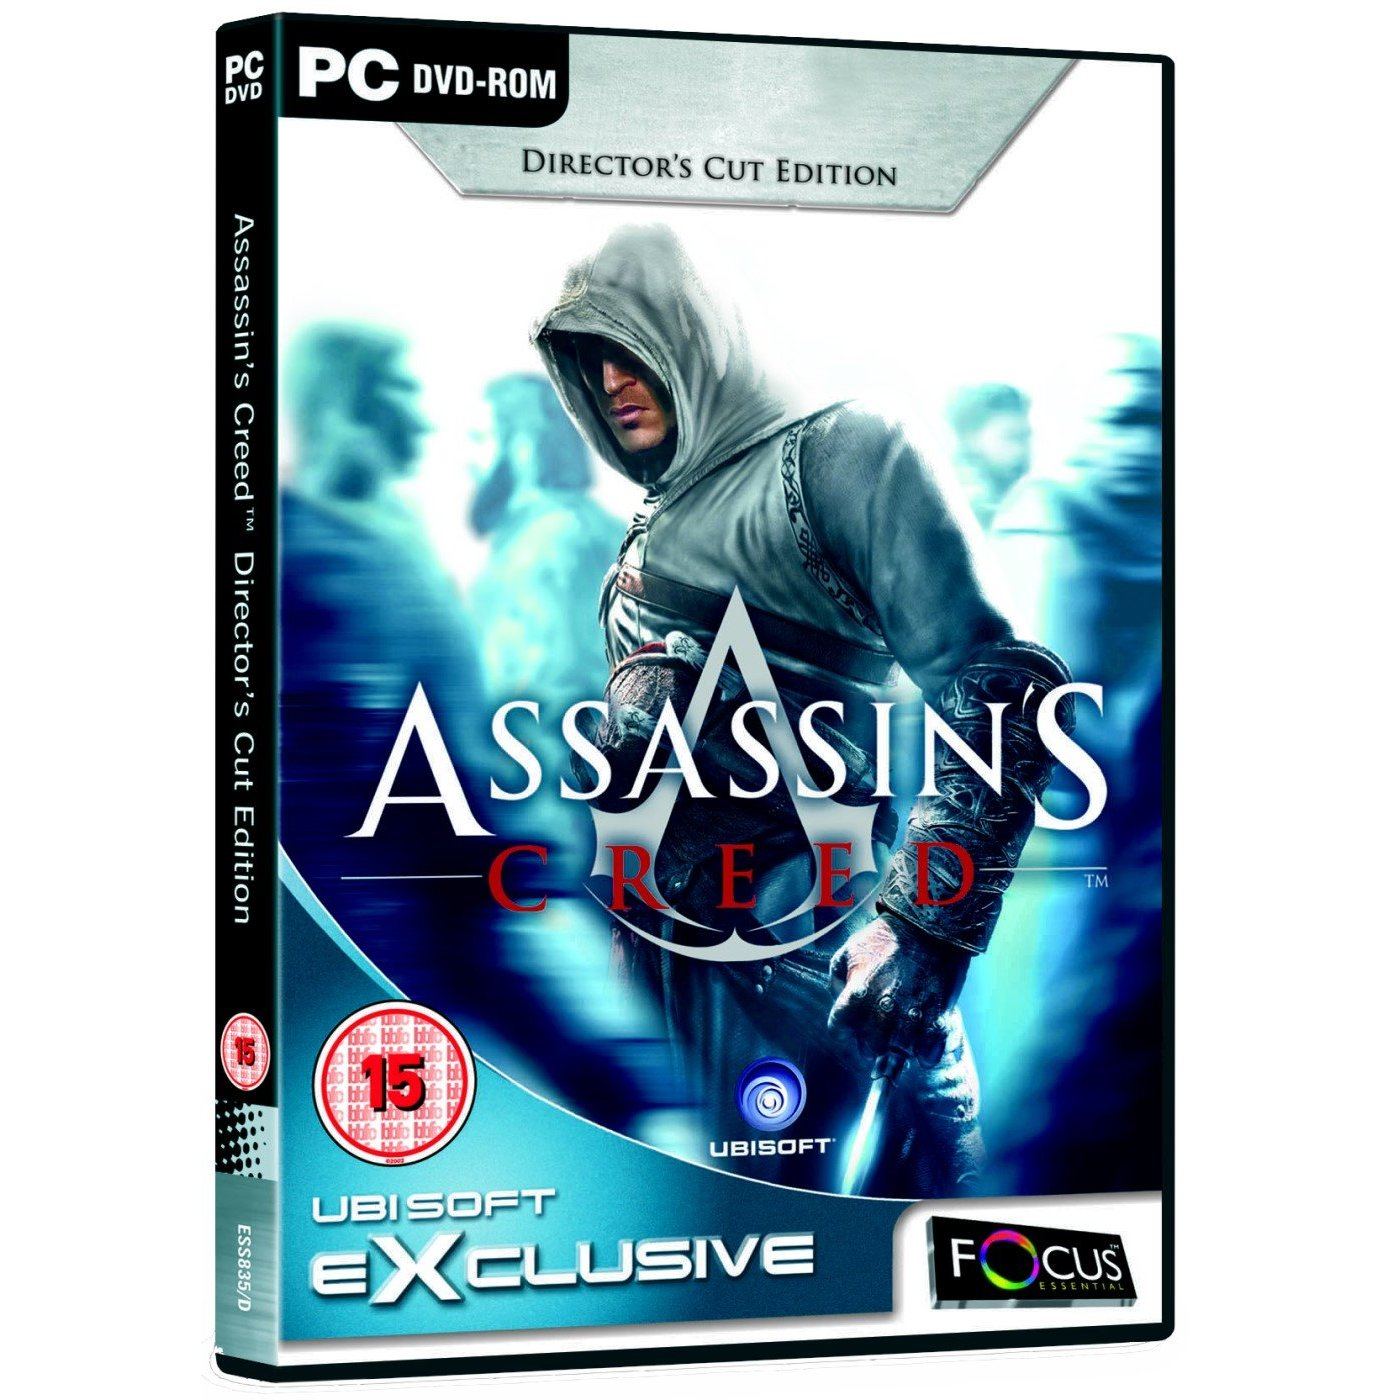 Assassin's Creed: Director's Cut Edition (Ubisoft Exclusive) (DVD-ROM)